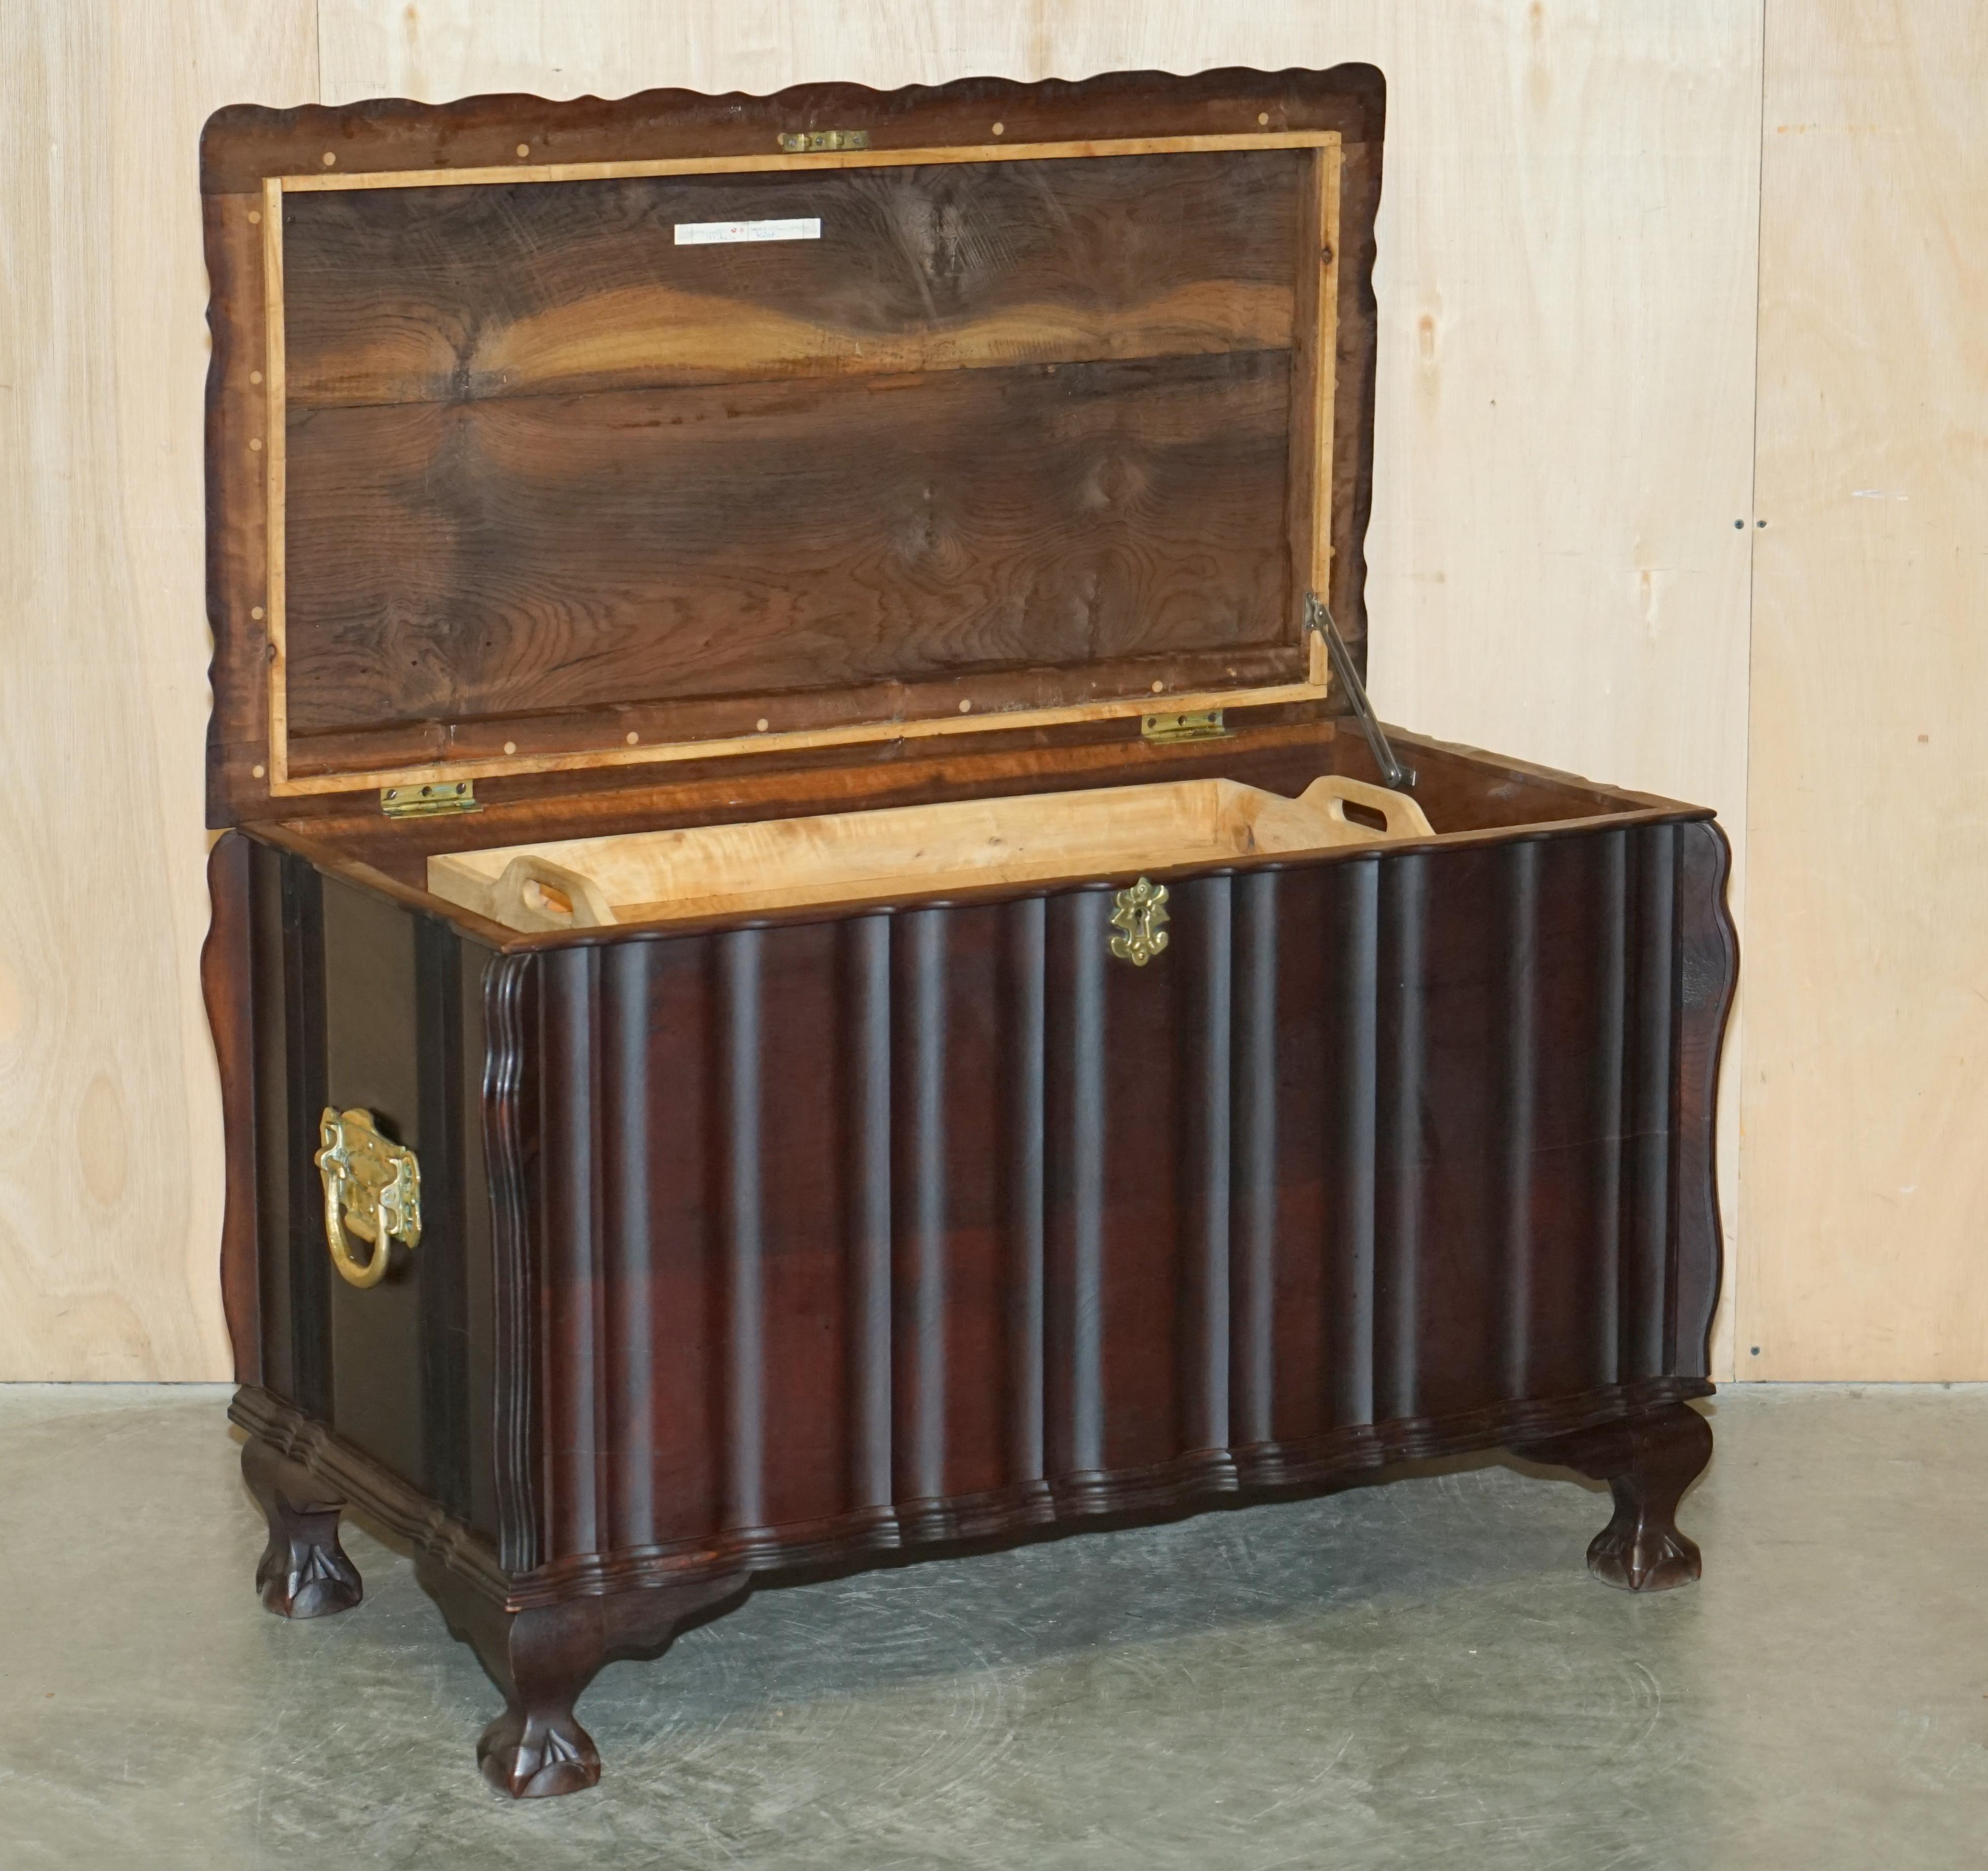 ViNTAGE HAND CARVED HARDWOOD TRUNK OR CHEST WITH ORNATE OVERSIZED BRASS FITTINGS For Sale 7